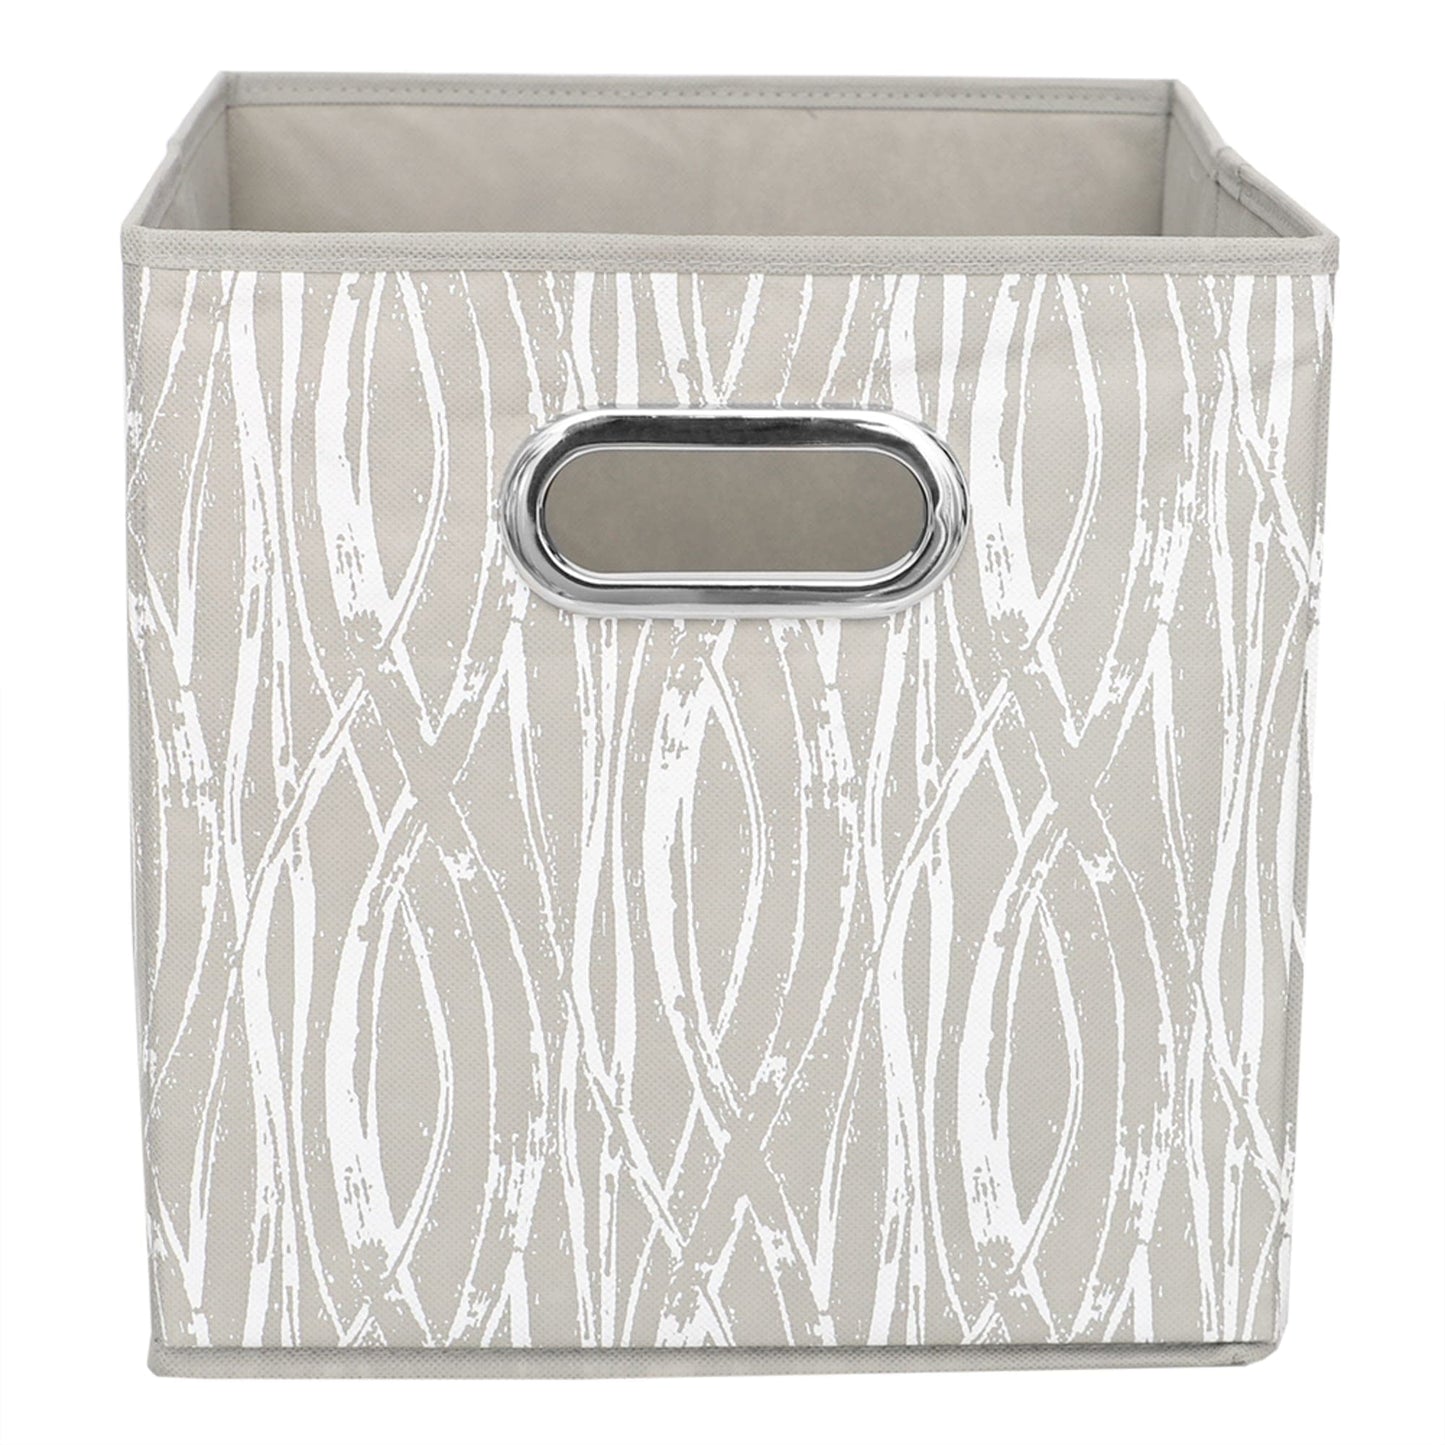 Weave Collapsible Non-Woven Storage Bin with Grommet Handle, Taupe